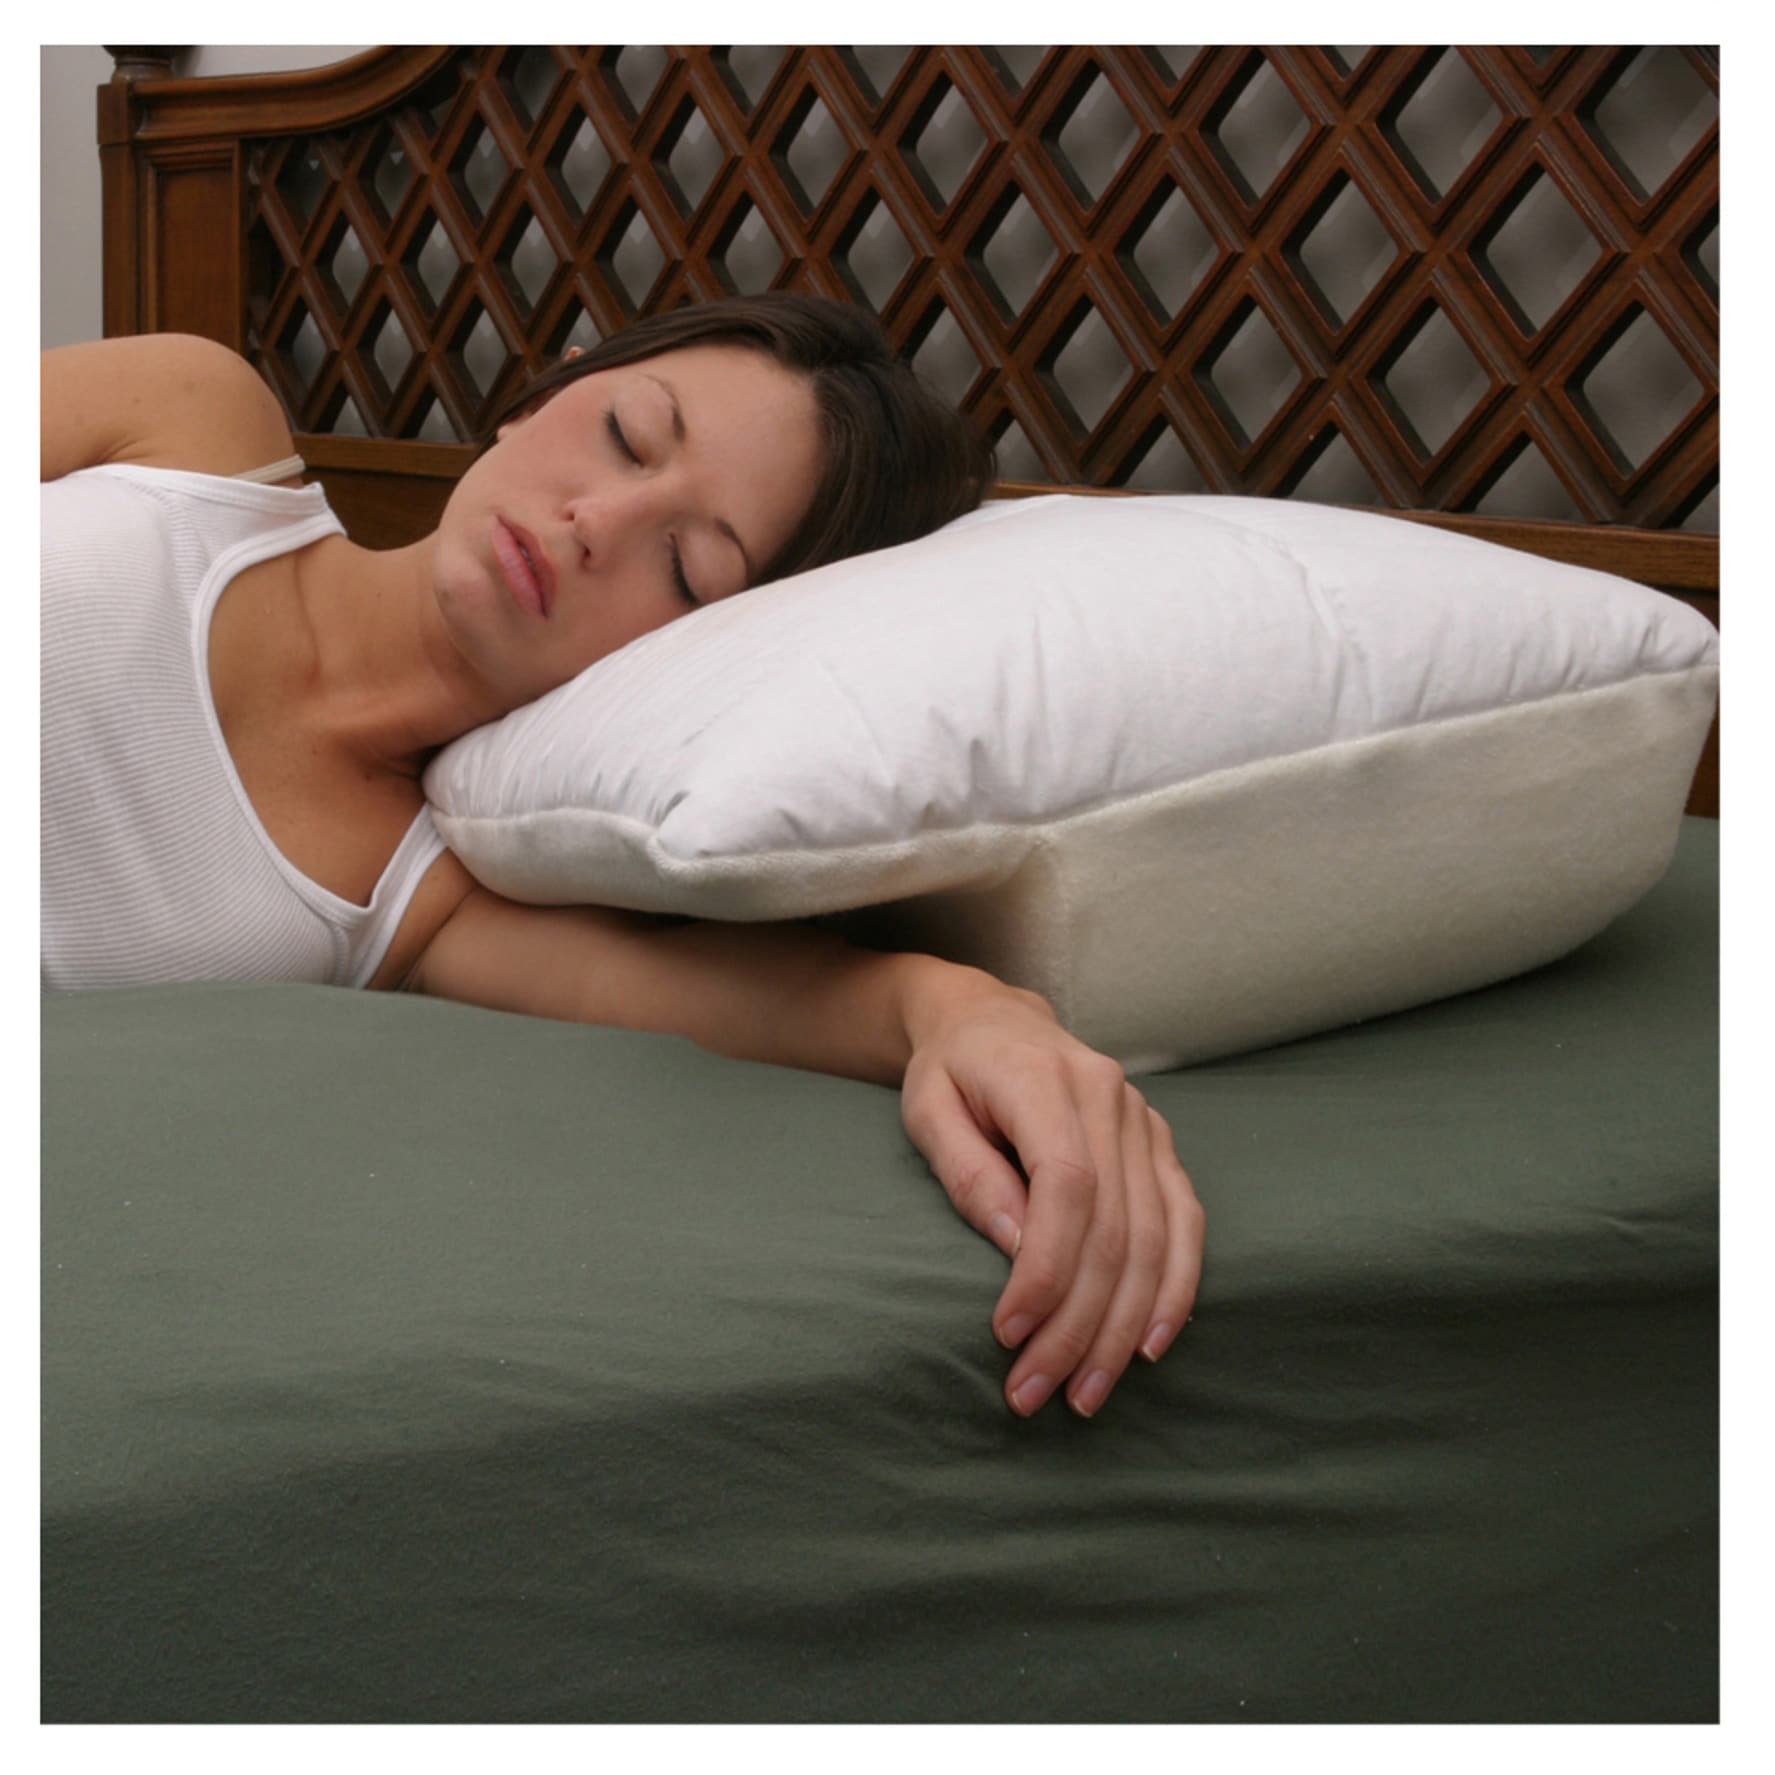  Better Sleep Pillow Gel Fiber Pillow - Patented Arm-Tunnel  Design Improves Hand And Arm Circulation - Neck Pain Relief - Perfect Side  And Stomach Sleeper Pillow - Bed Pillow, White 